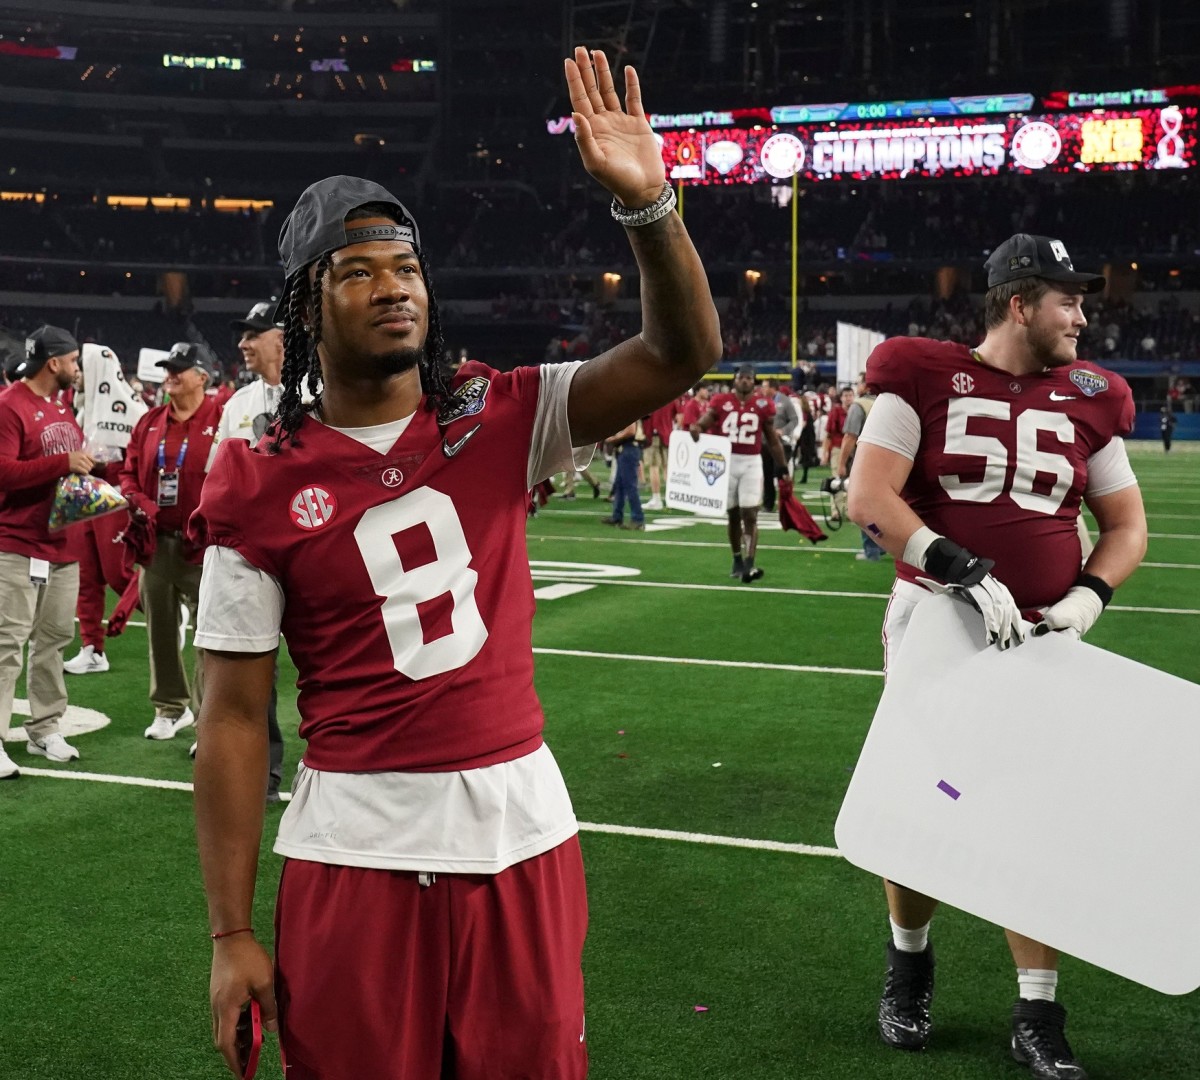 Alabama wide receiver John Metchie III (8) waves to fans after the 2021 College Football Playoff Semifinal game at the 86th Cotton Bowl in AT&T Stadium in Arlington, Texas Friday, Dec. 31, 2021. Alabama defeated Cincinnati 27-6 to advance to the national championship game.